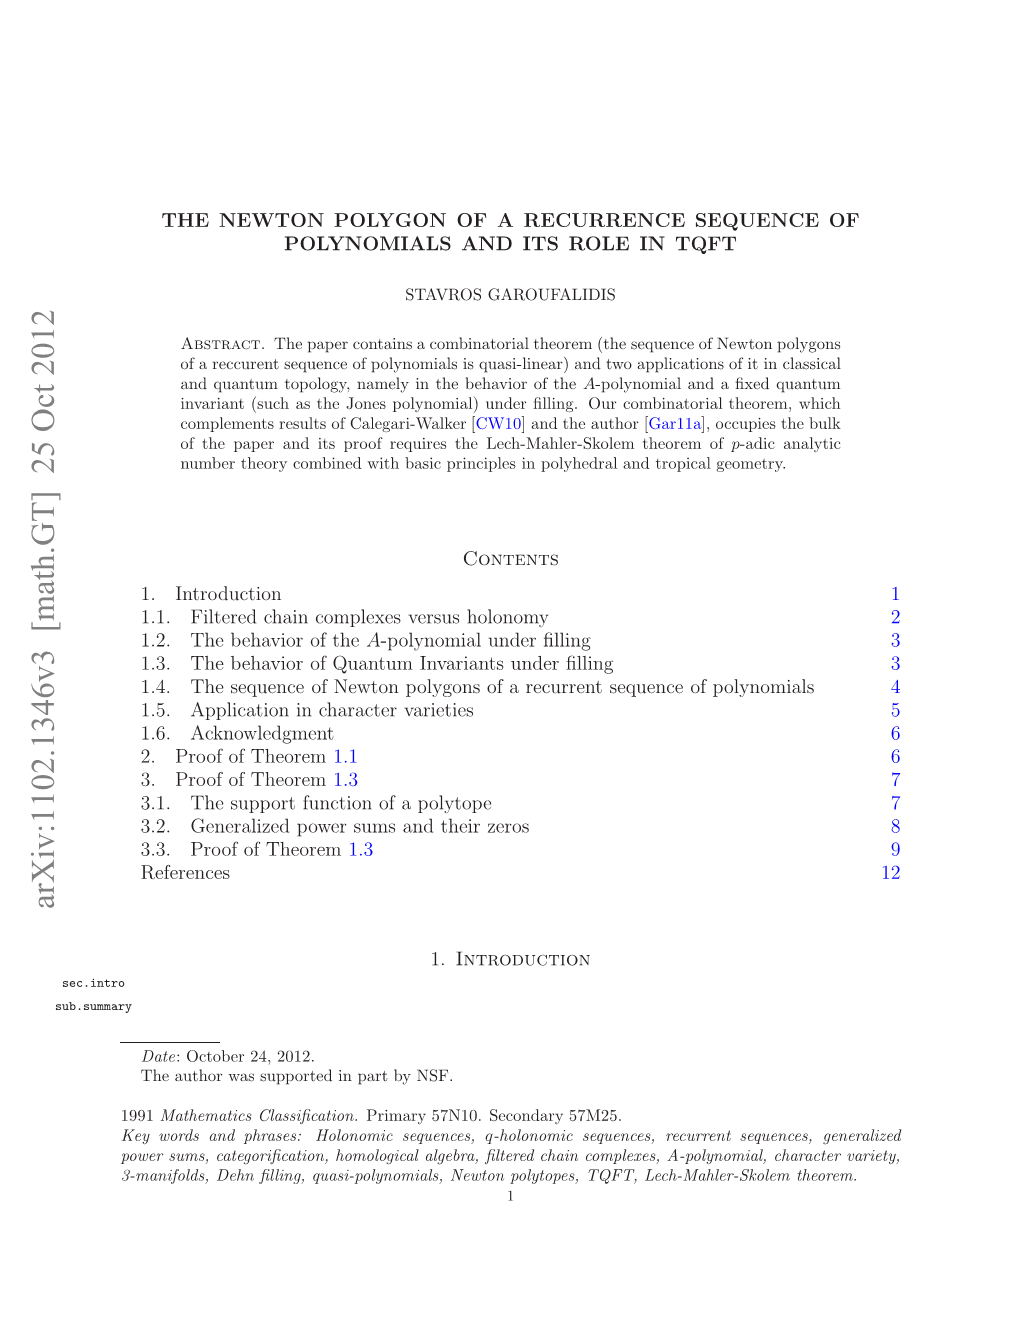 The Newton Polygon of a Recurrence Sequence of Polynomials and Its